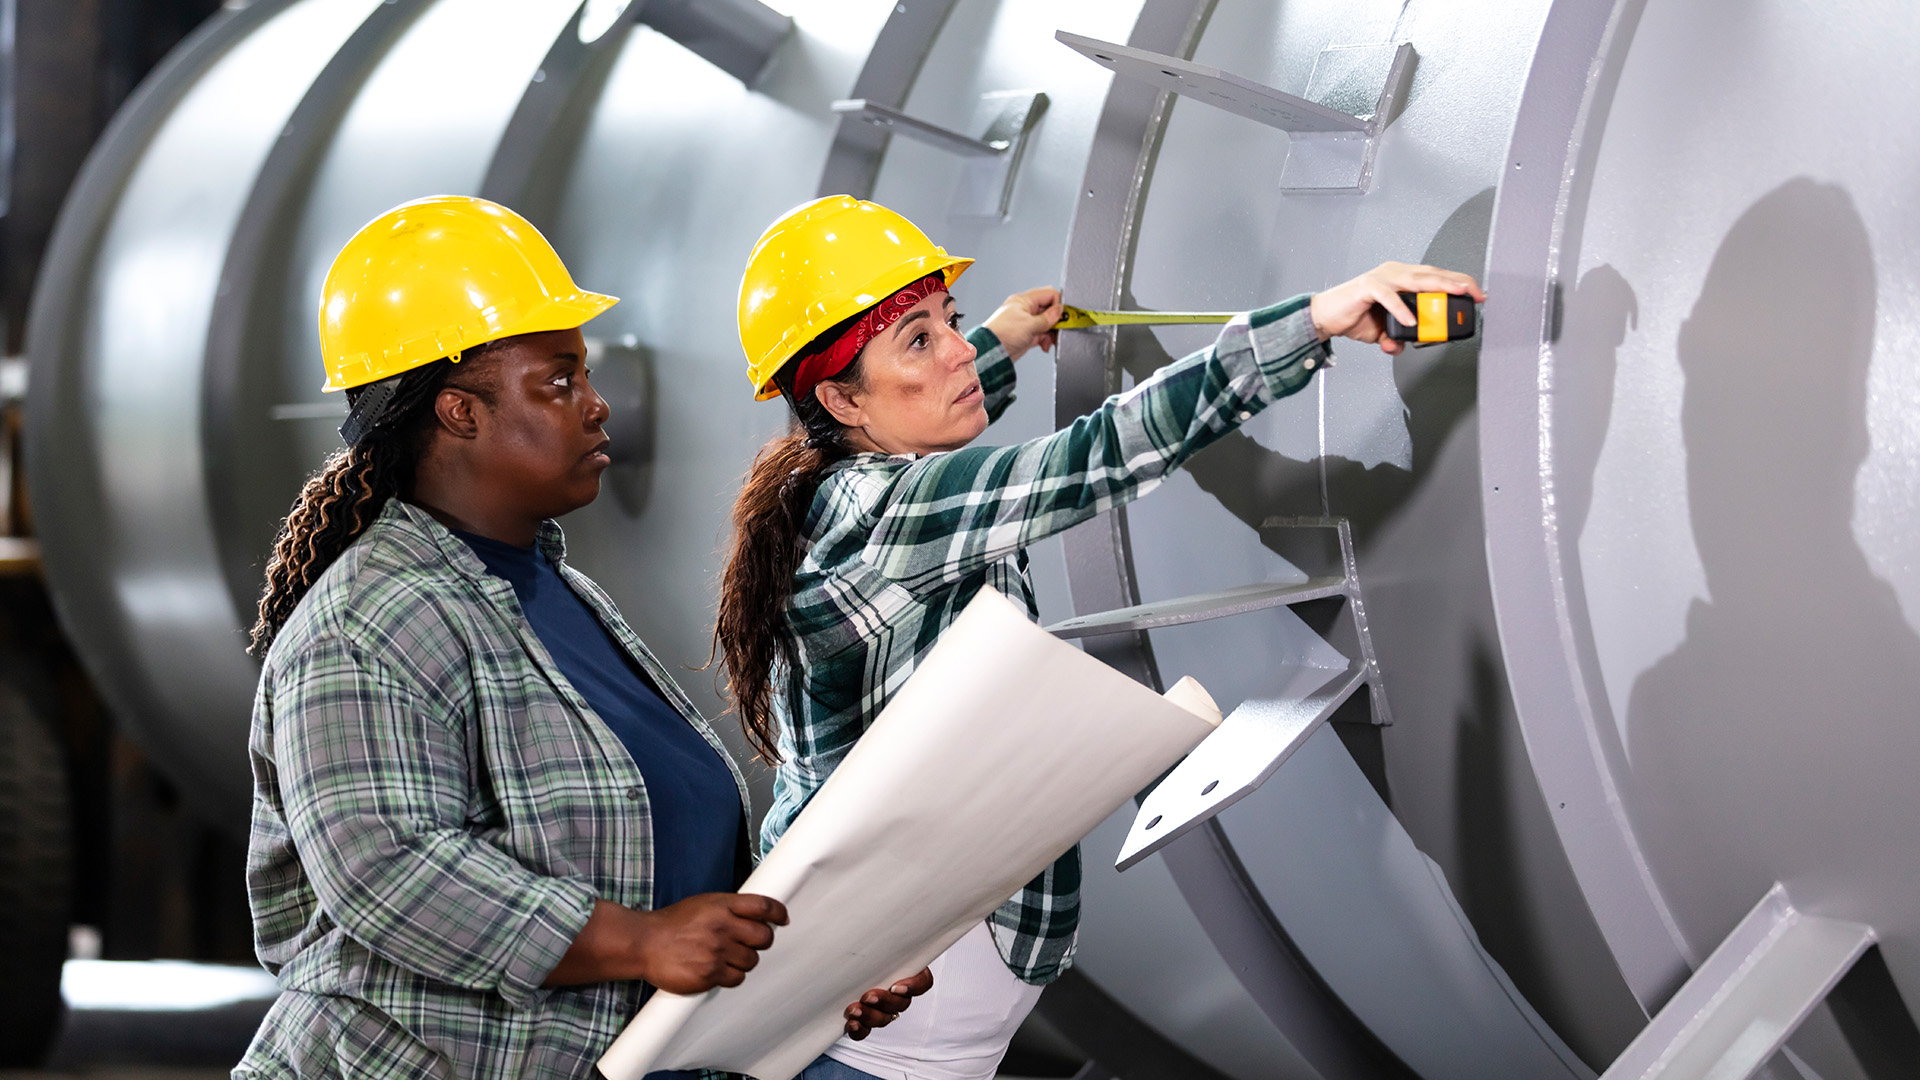 More Women in Manufacturing Jobs in Every Age Group